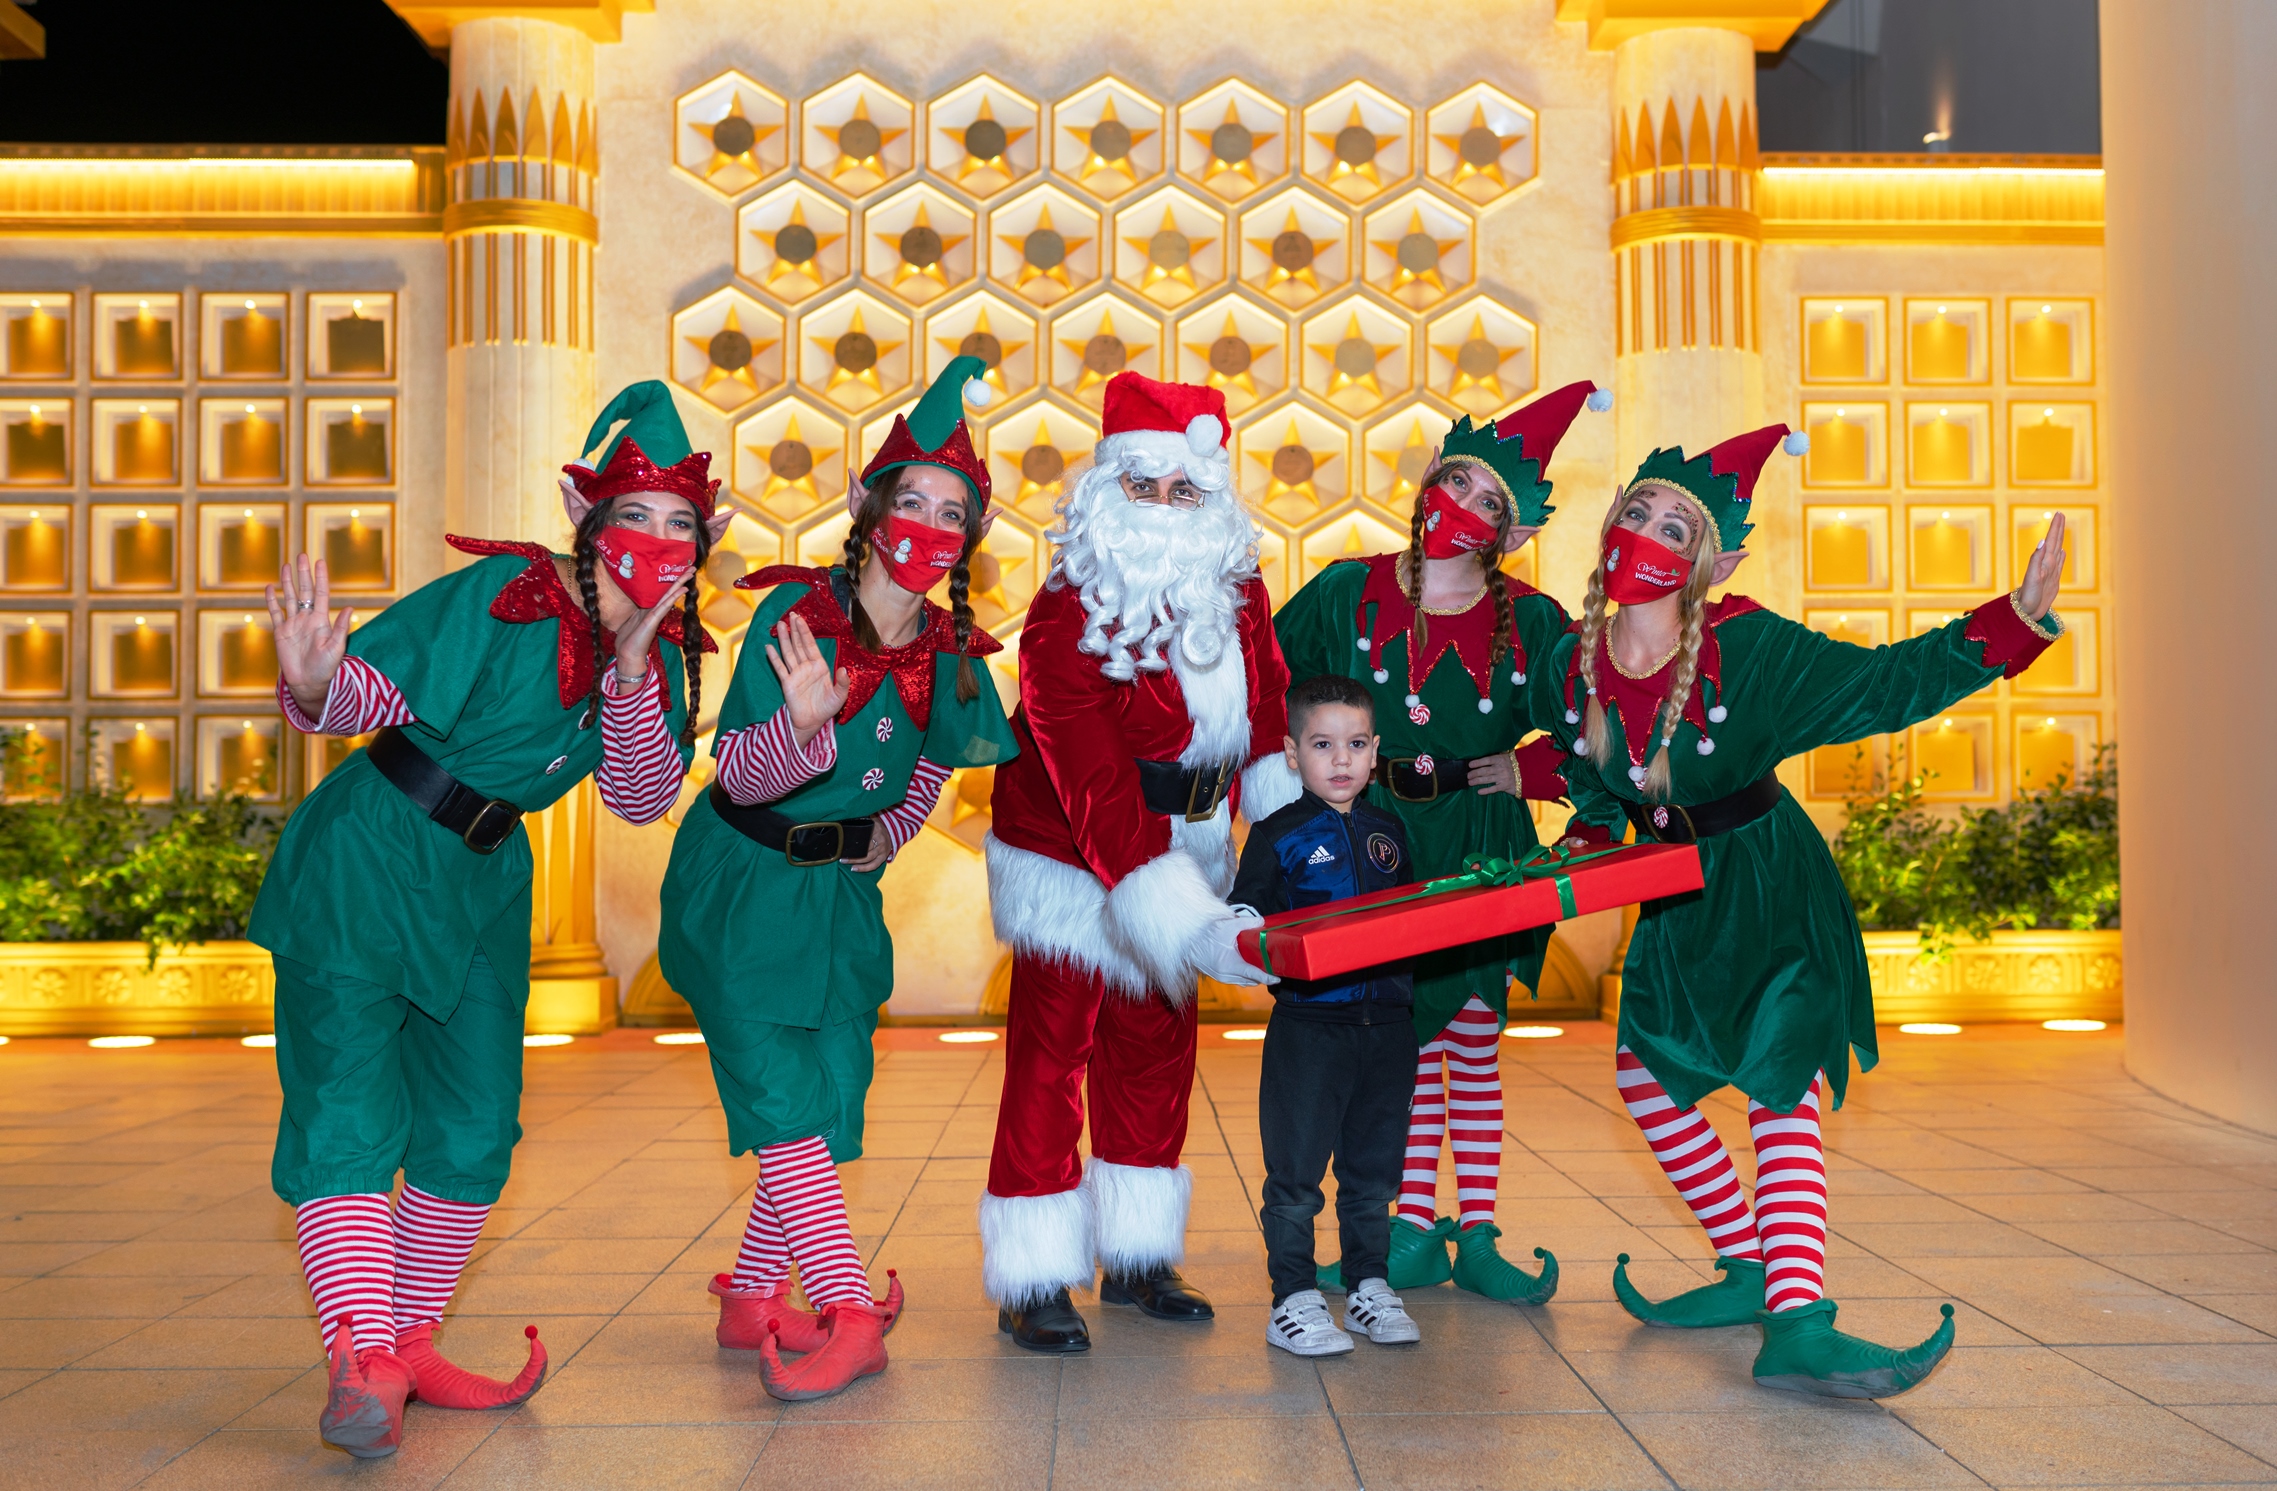 Image for Santa Surprises 25 Children With Wishes Sent In Latest Global Village Guinness World Record Achievement